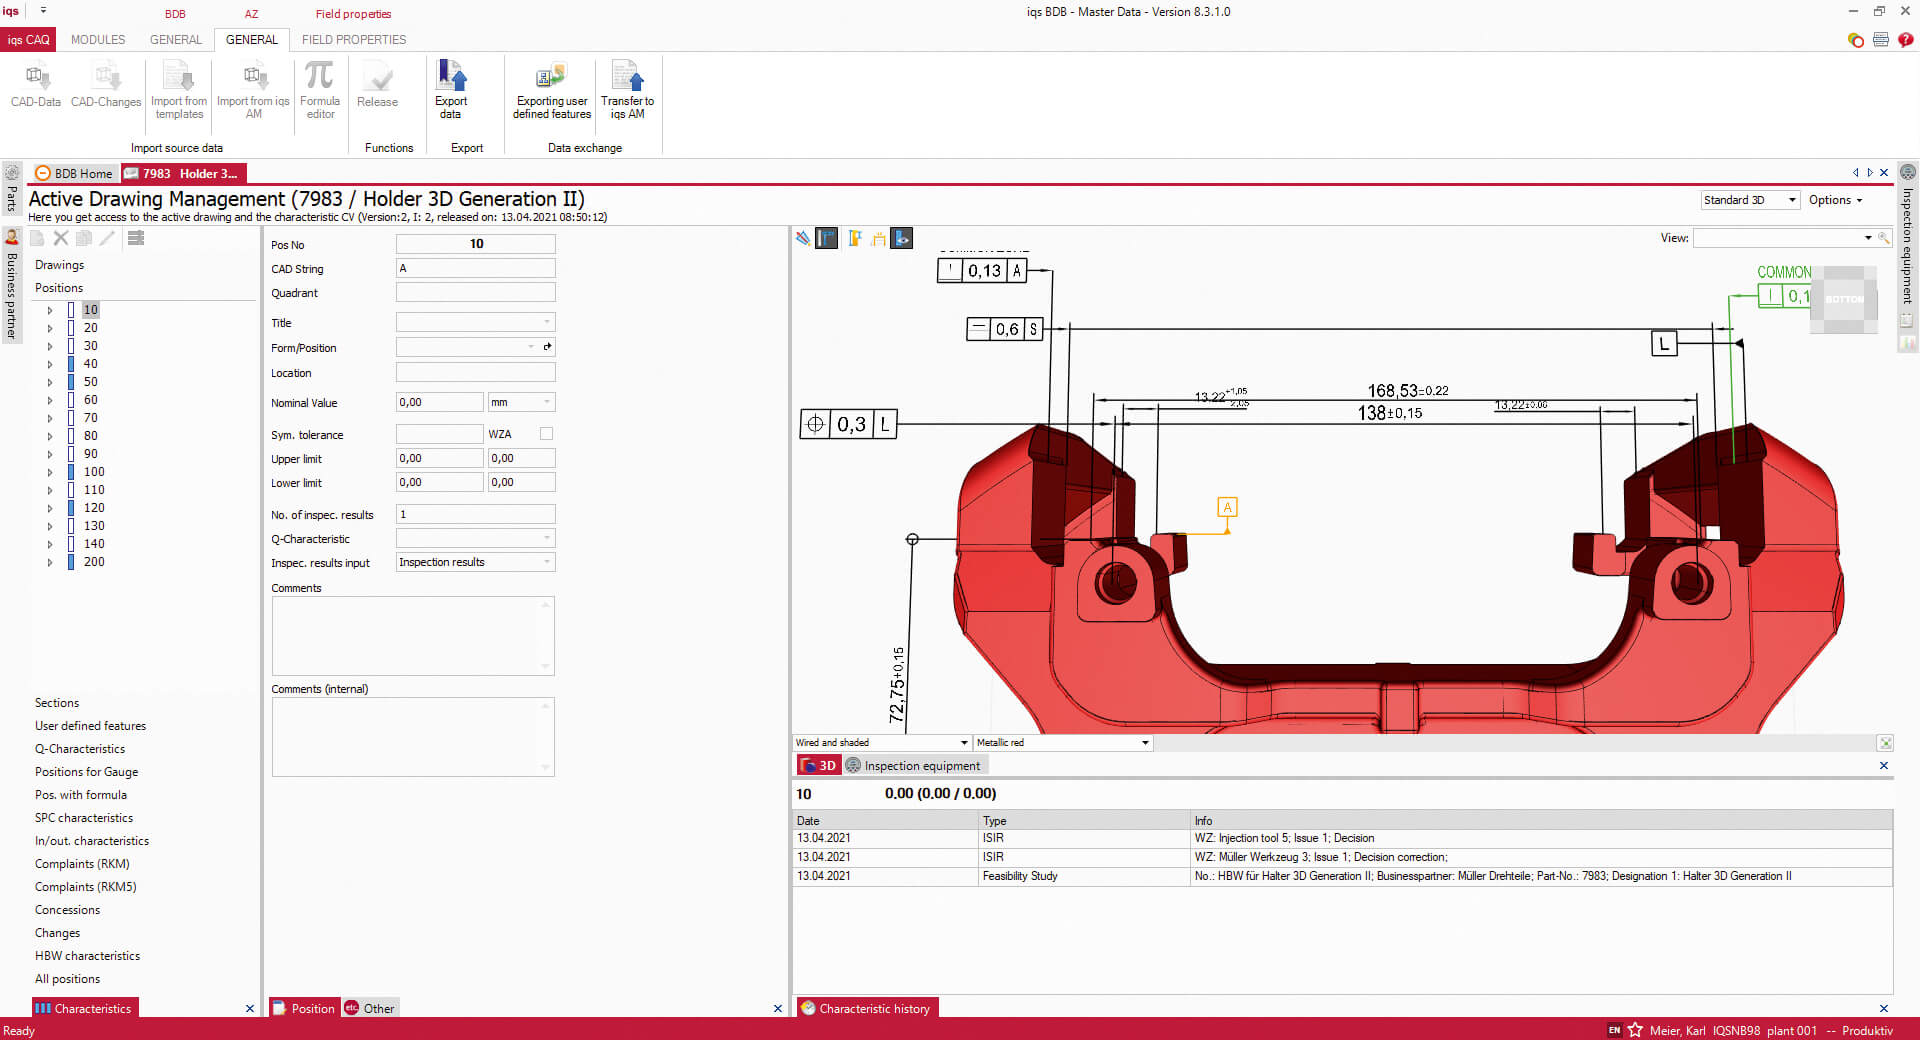 Software screen requirements management with 3D model